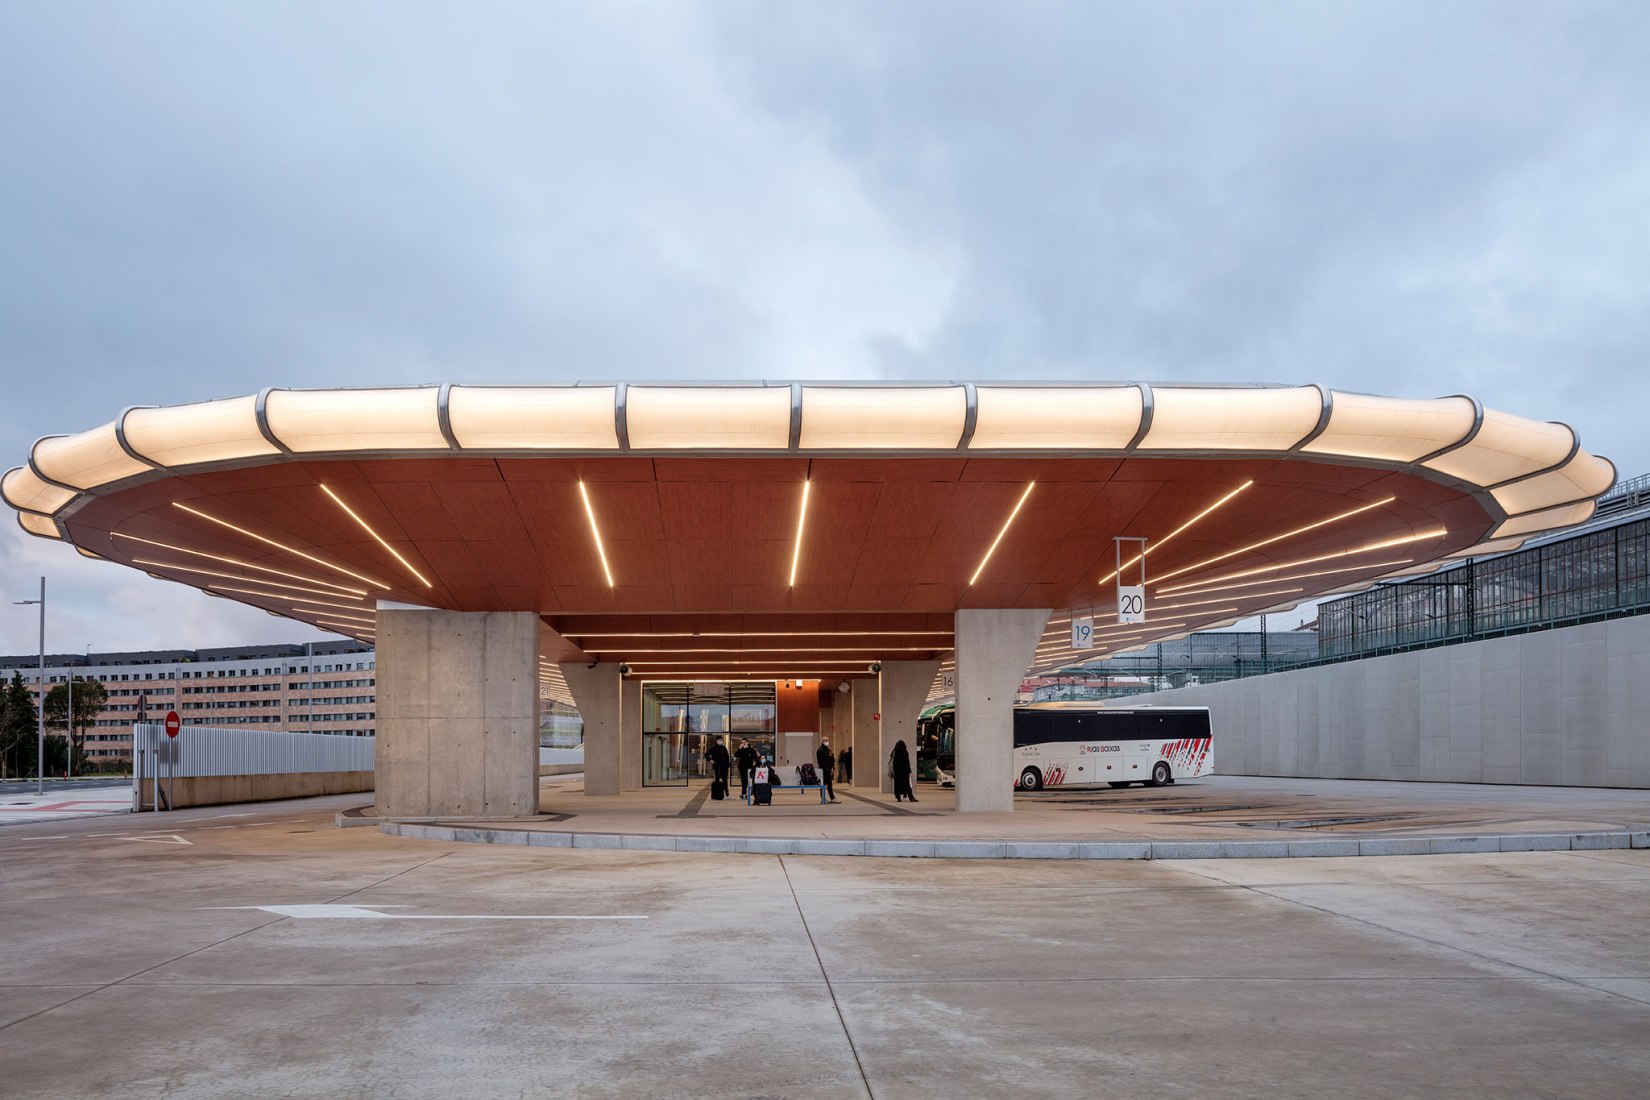 Bus Station integrated in the Santiago de Compostela Intermodal Station by IDOM. Photograph by Aitor Ortiz.